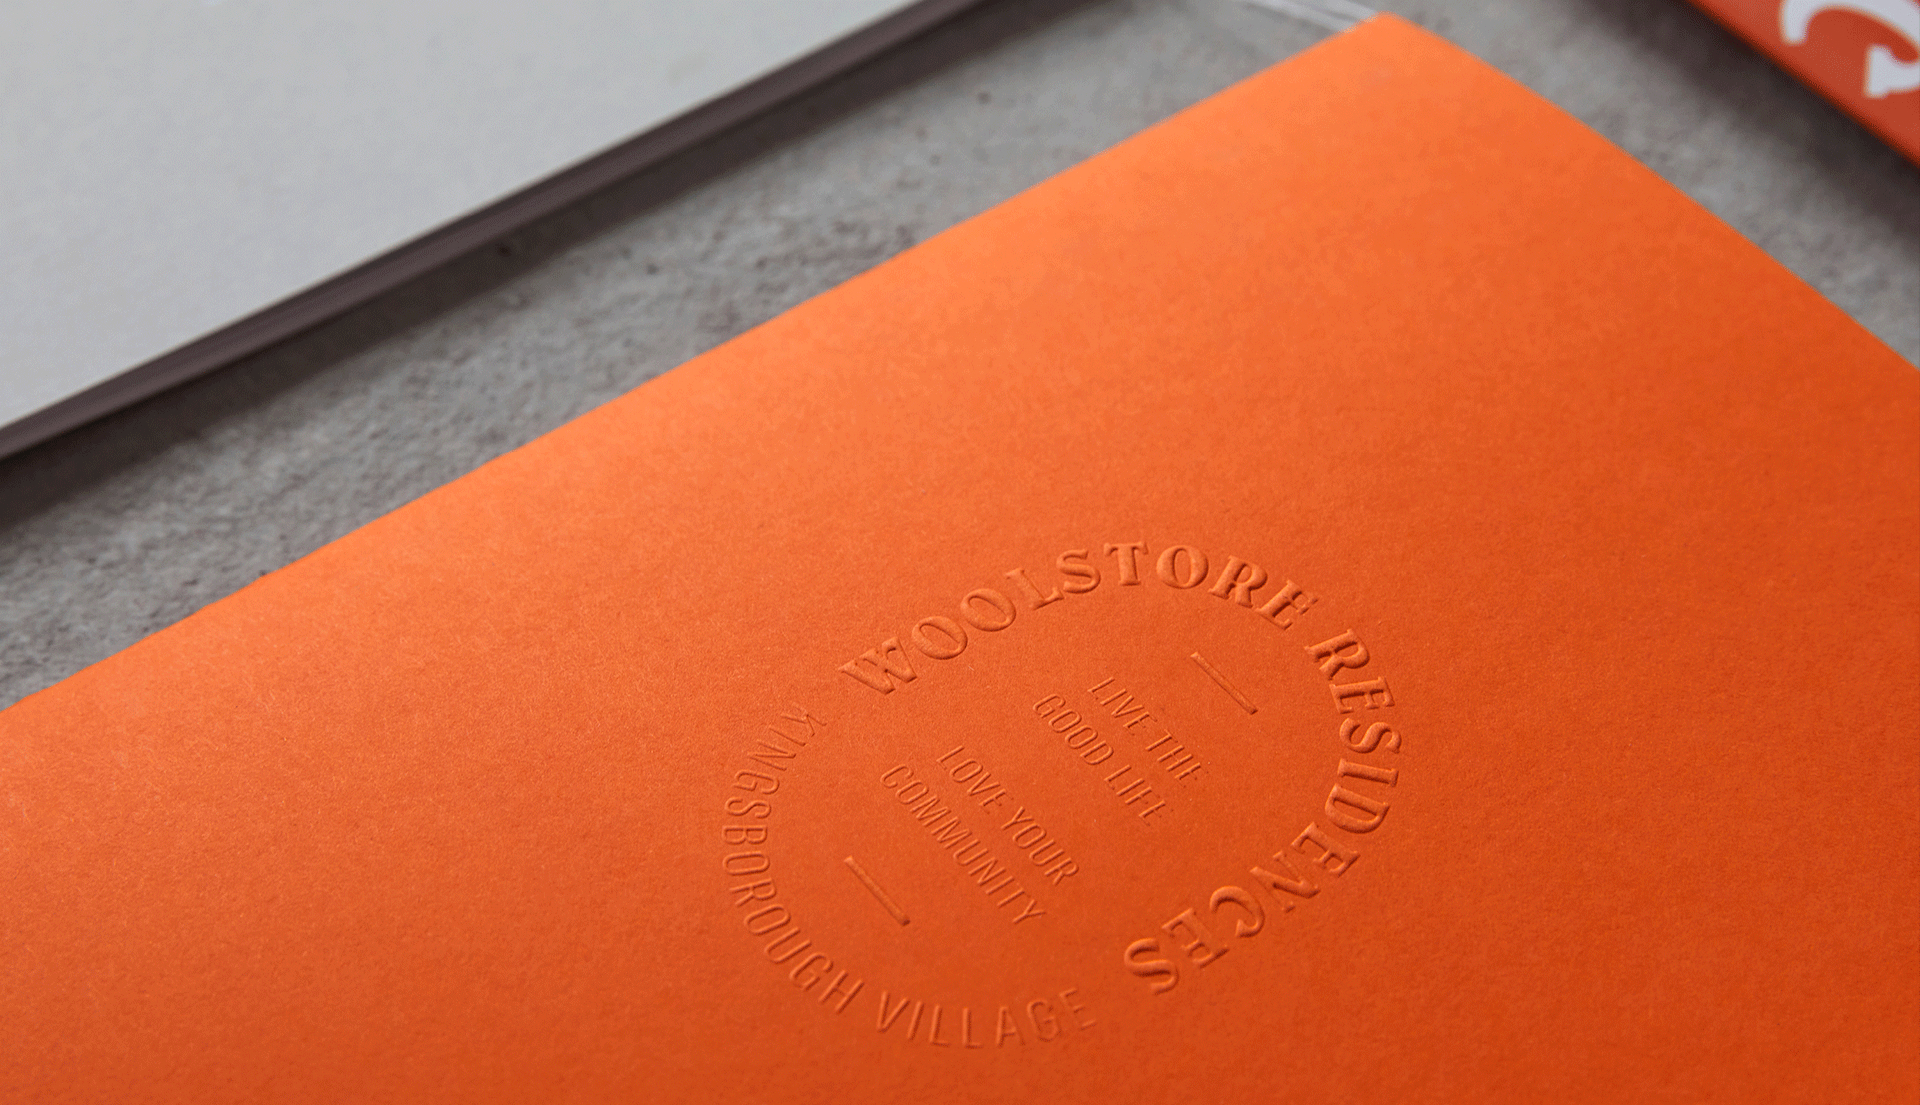 Close up photo of orange brochure cover with Woolstore Residences logo embossed.